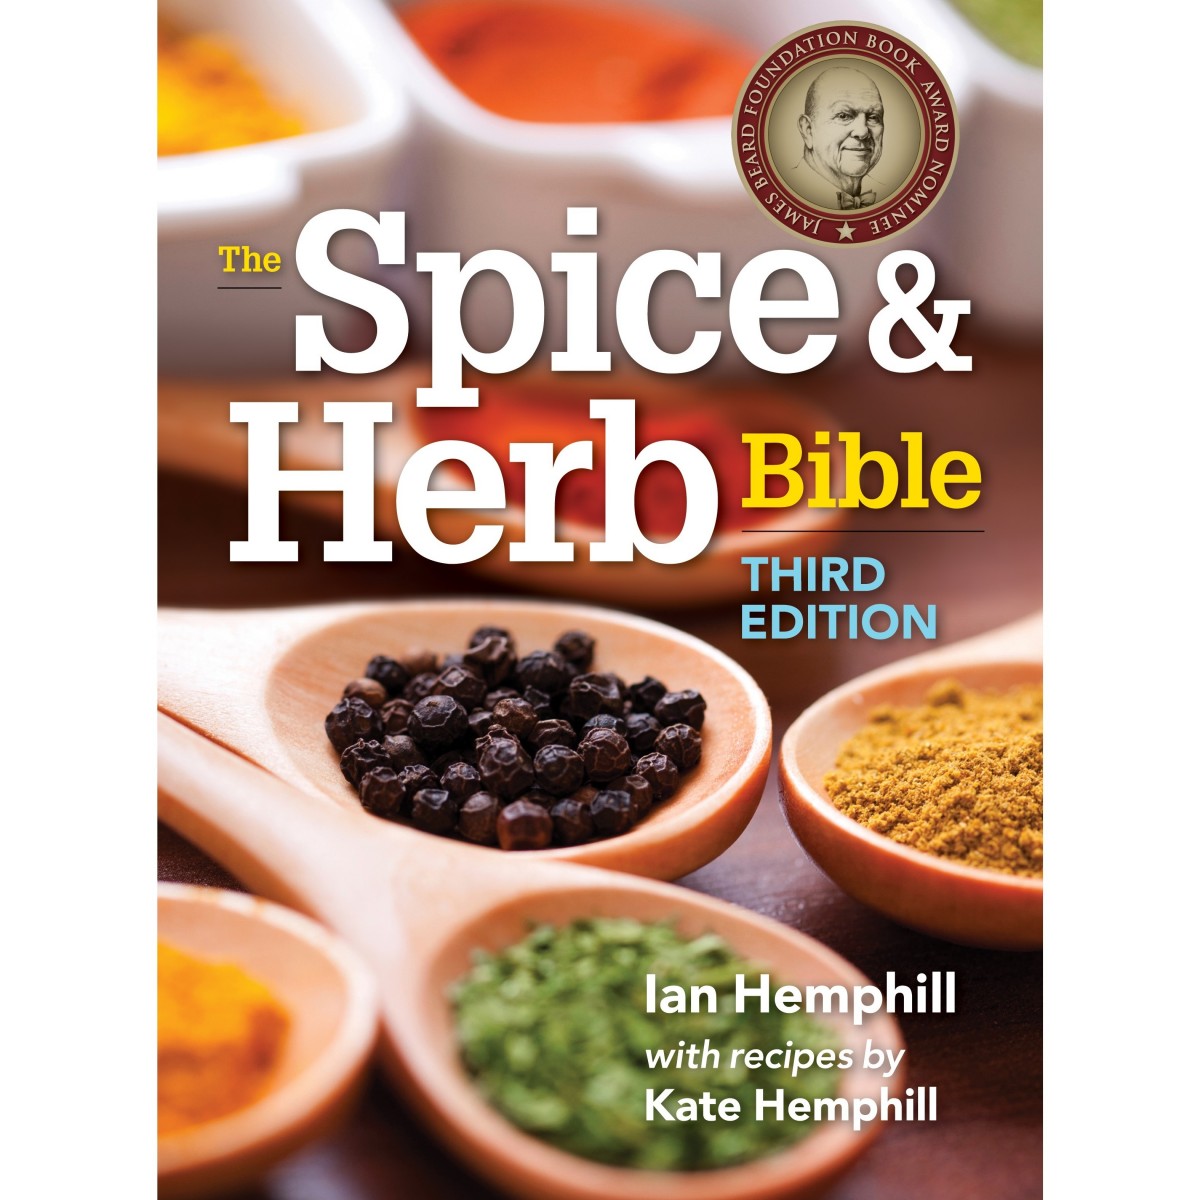 https://www.herbies.com.au/wp-content/uploads/2020/10/SpiceHerbSoftcover_2017.jpg?v=1621493416